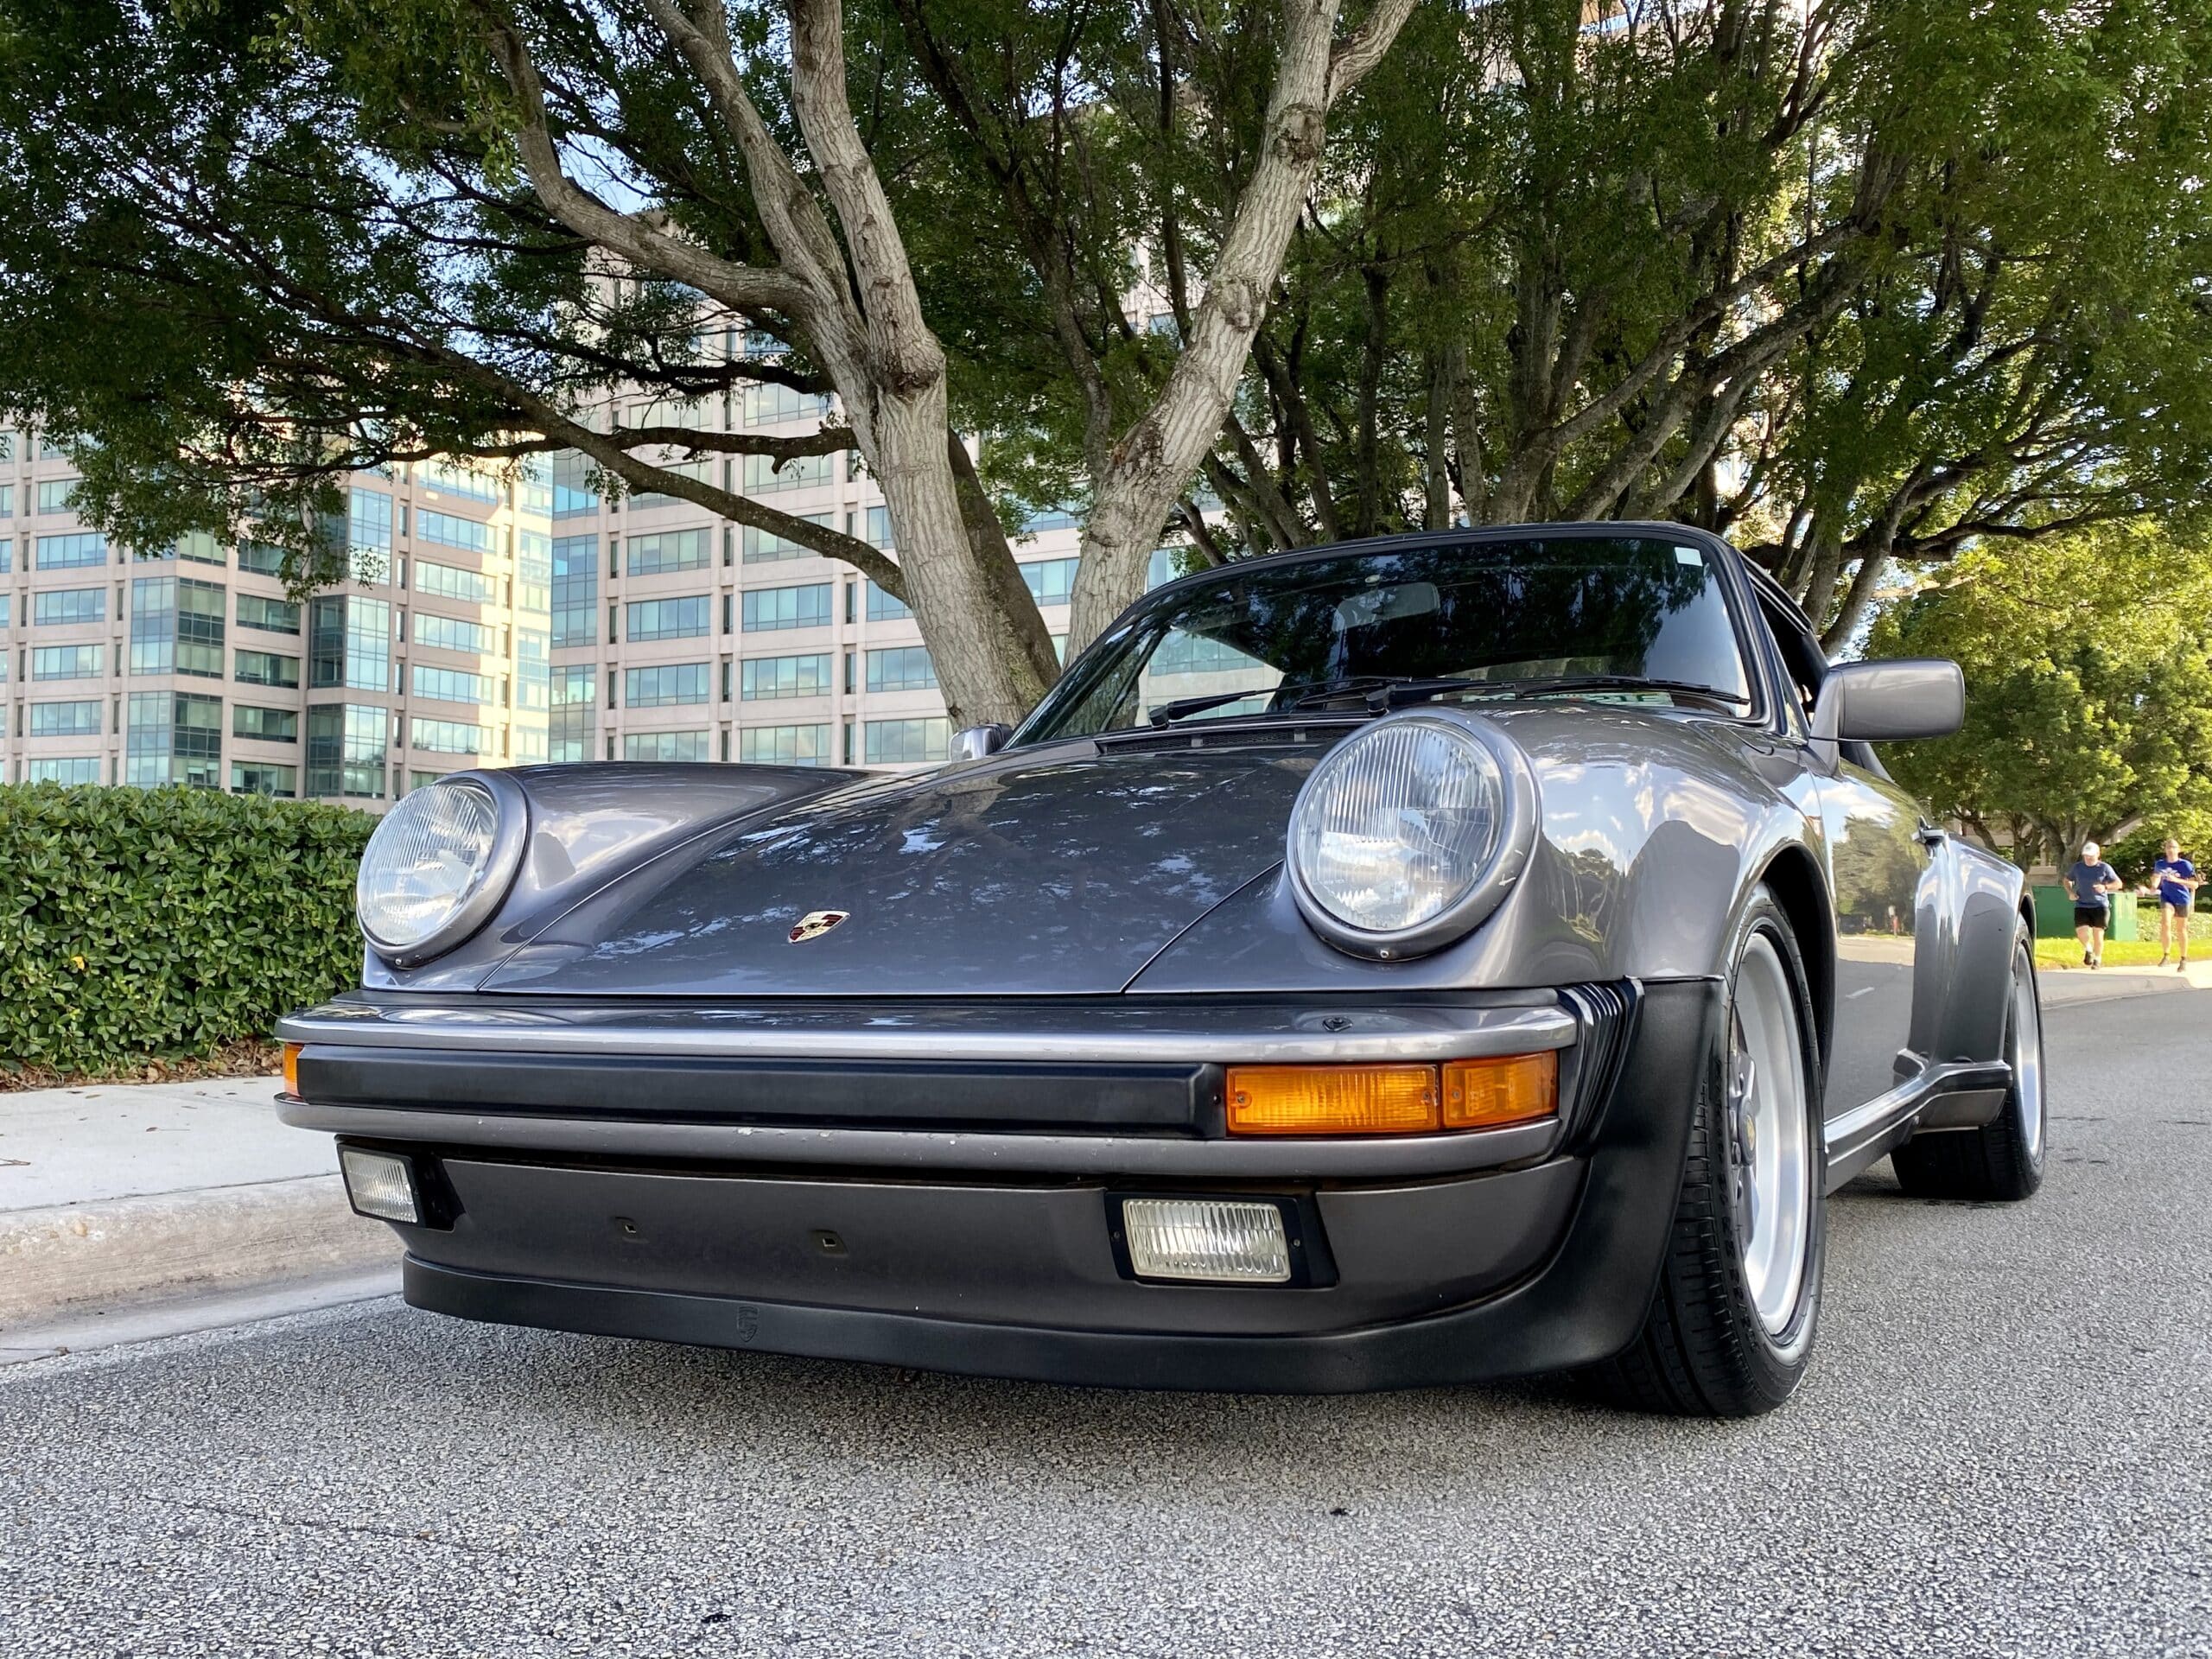 1985 Porsche 911 M491 Widebody Turbo Look FACTORY WIDE BODY TURBO LOOK / M491 / ONLY 39,000 MILES / SPORT SEATS /CABRIOLET